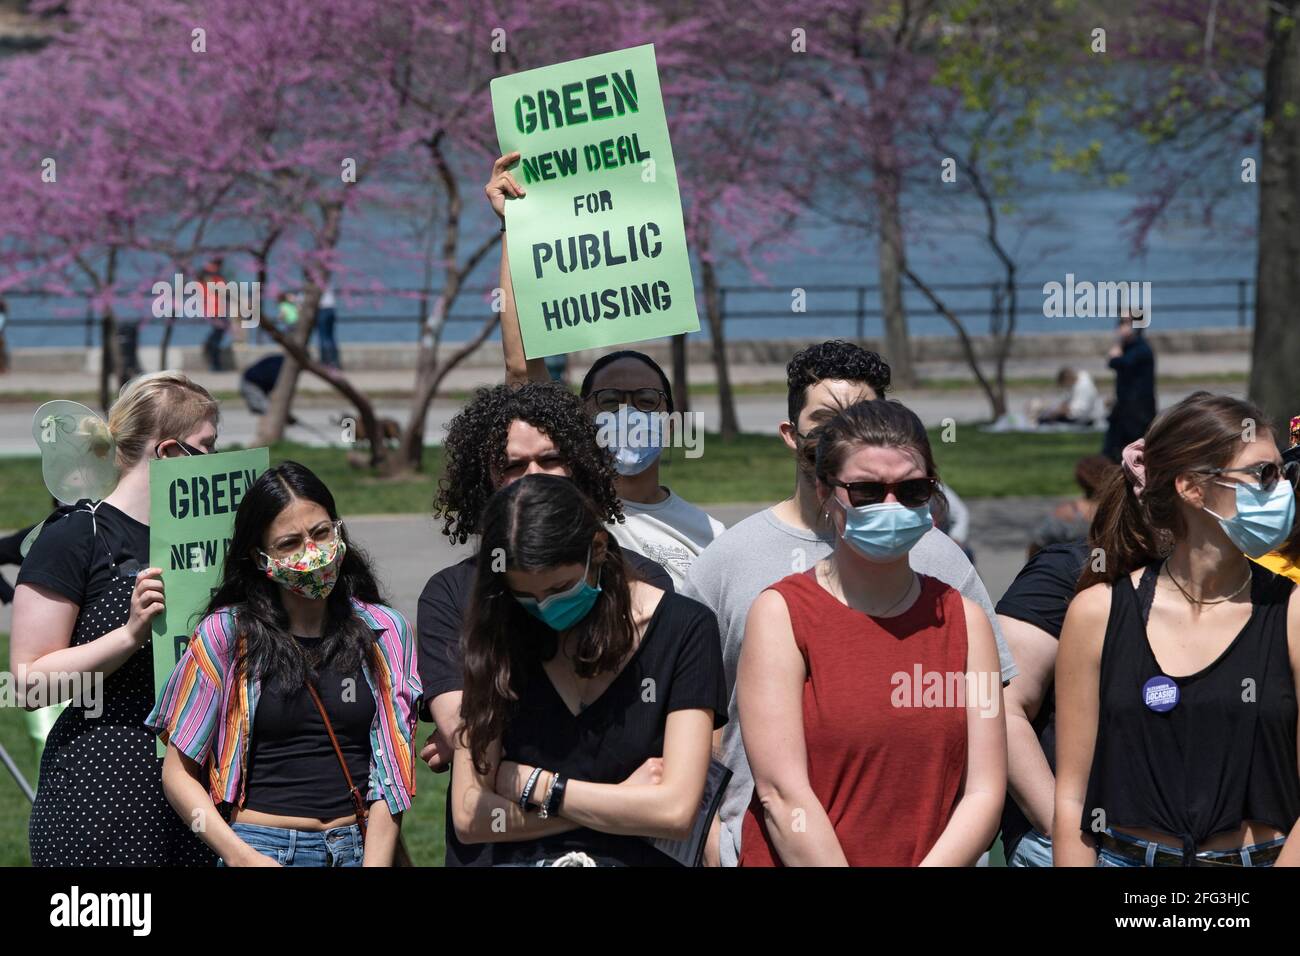 NEW YORK, NY - APRIL 24: A man holds a sign that reads 'Green New Deal for Public Housing' seen during an Earth Day Celebration in Astoria Park on April 24, 2021 in the Astoria neighborhood of the Queens borough of New York City.   Congresswoman Ocasio-Cortez joined by New York State Senator Jessica Ramos and New York Assembly Member Zohran Mamdani for remarks about the NRG Energy, Inc proposal for the Astoria power plant. re Credit: Ron Adar/Alamy Live News Stock Photo